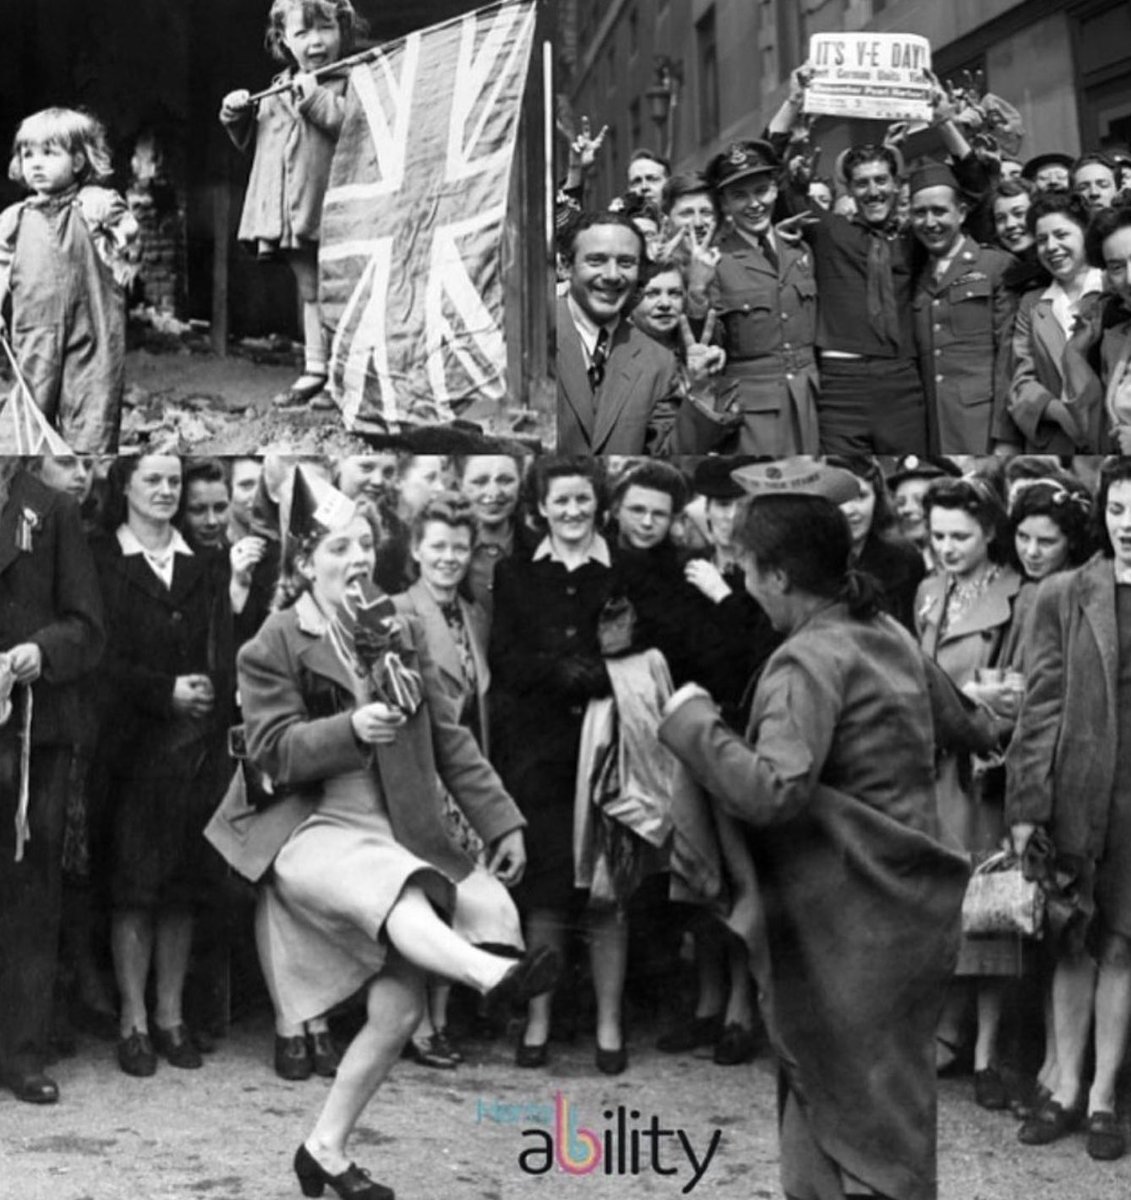 All gave some, some gave all - never forget the sacrifice so we could have freedom!

Today marks VE Day.

We're forever grateful for the sacrifices that were made for us! 🇬🇧

#VEday #Heroes #NeverForget #HertsAbility